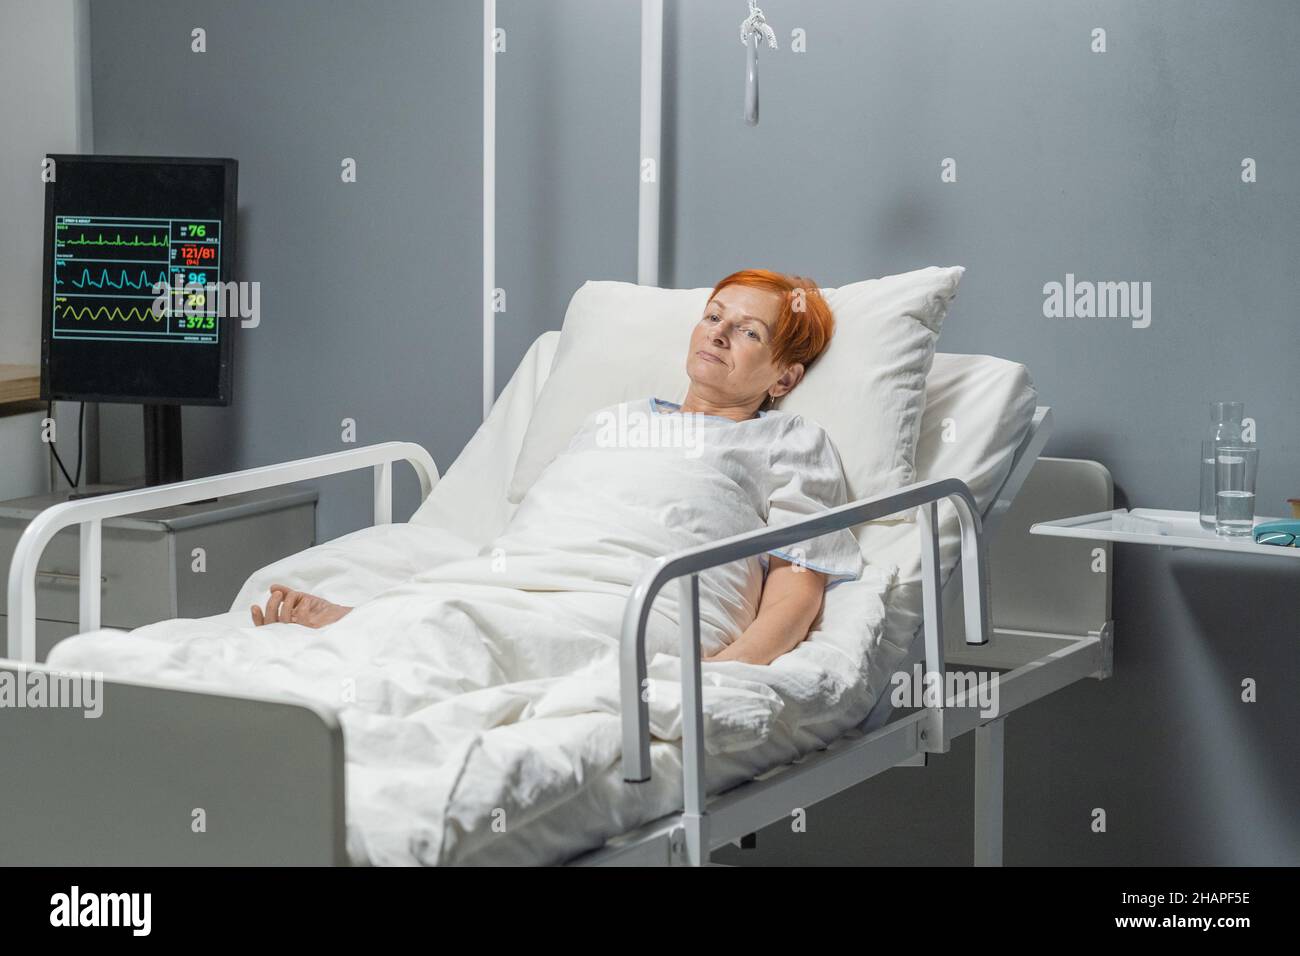 Elderly sick woman with sad expression lying in hospital bed after operation Stock Photo